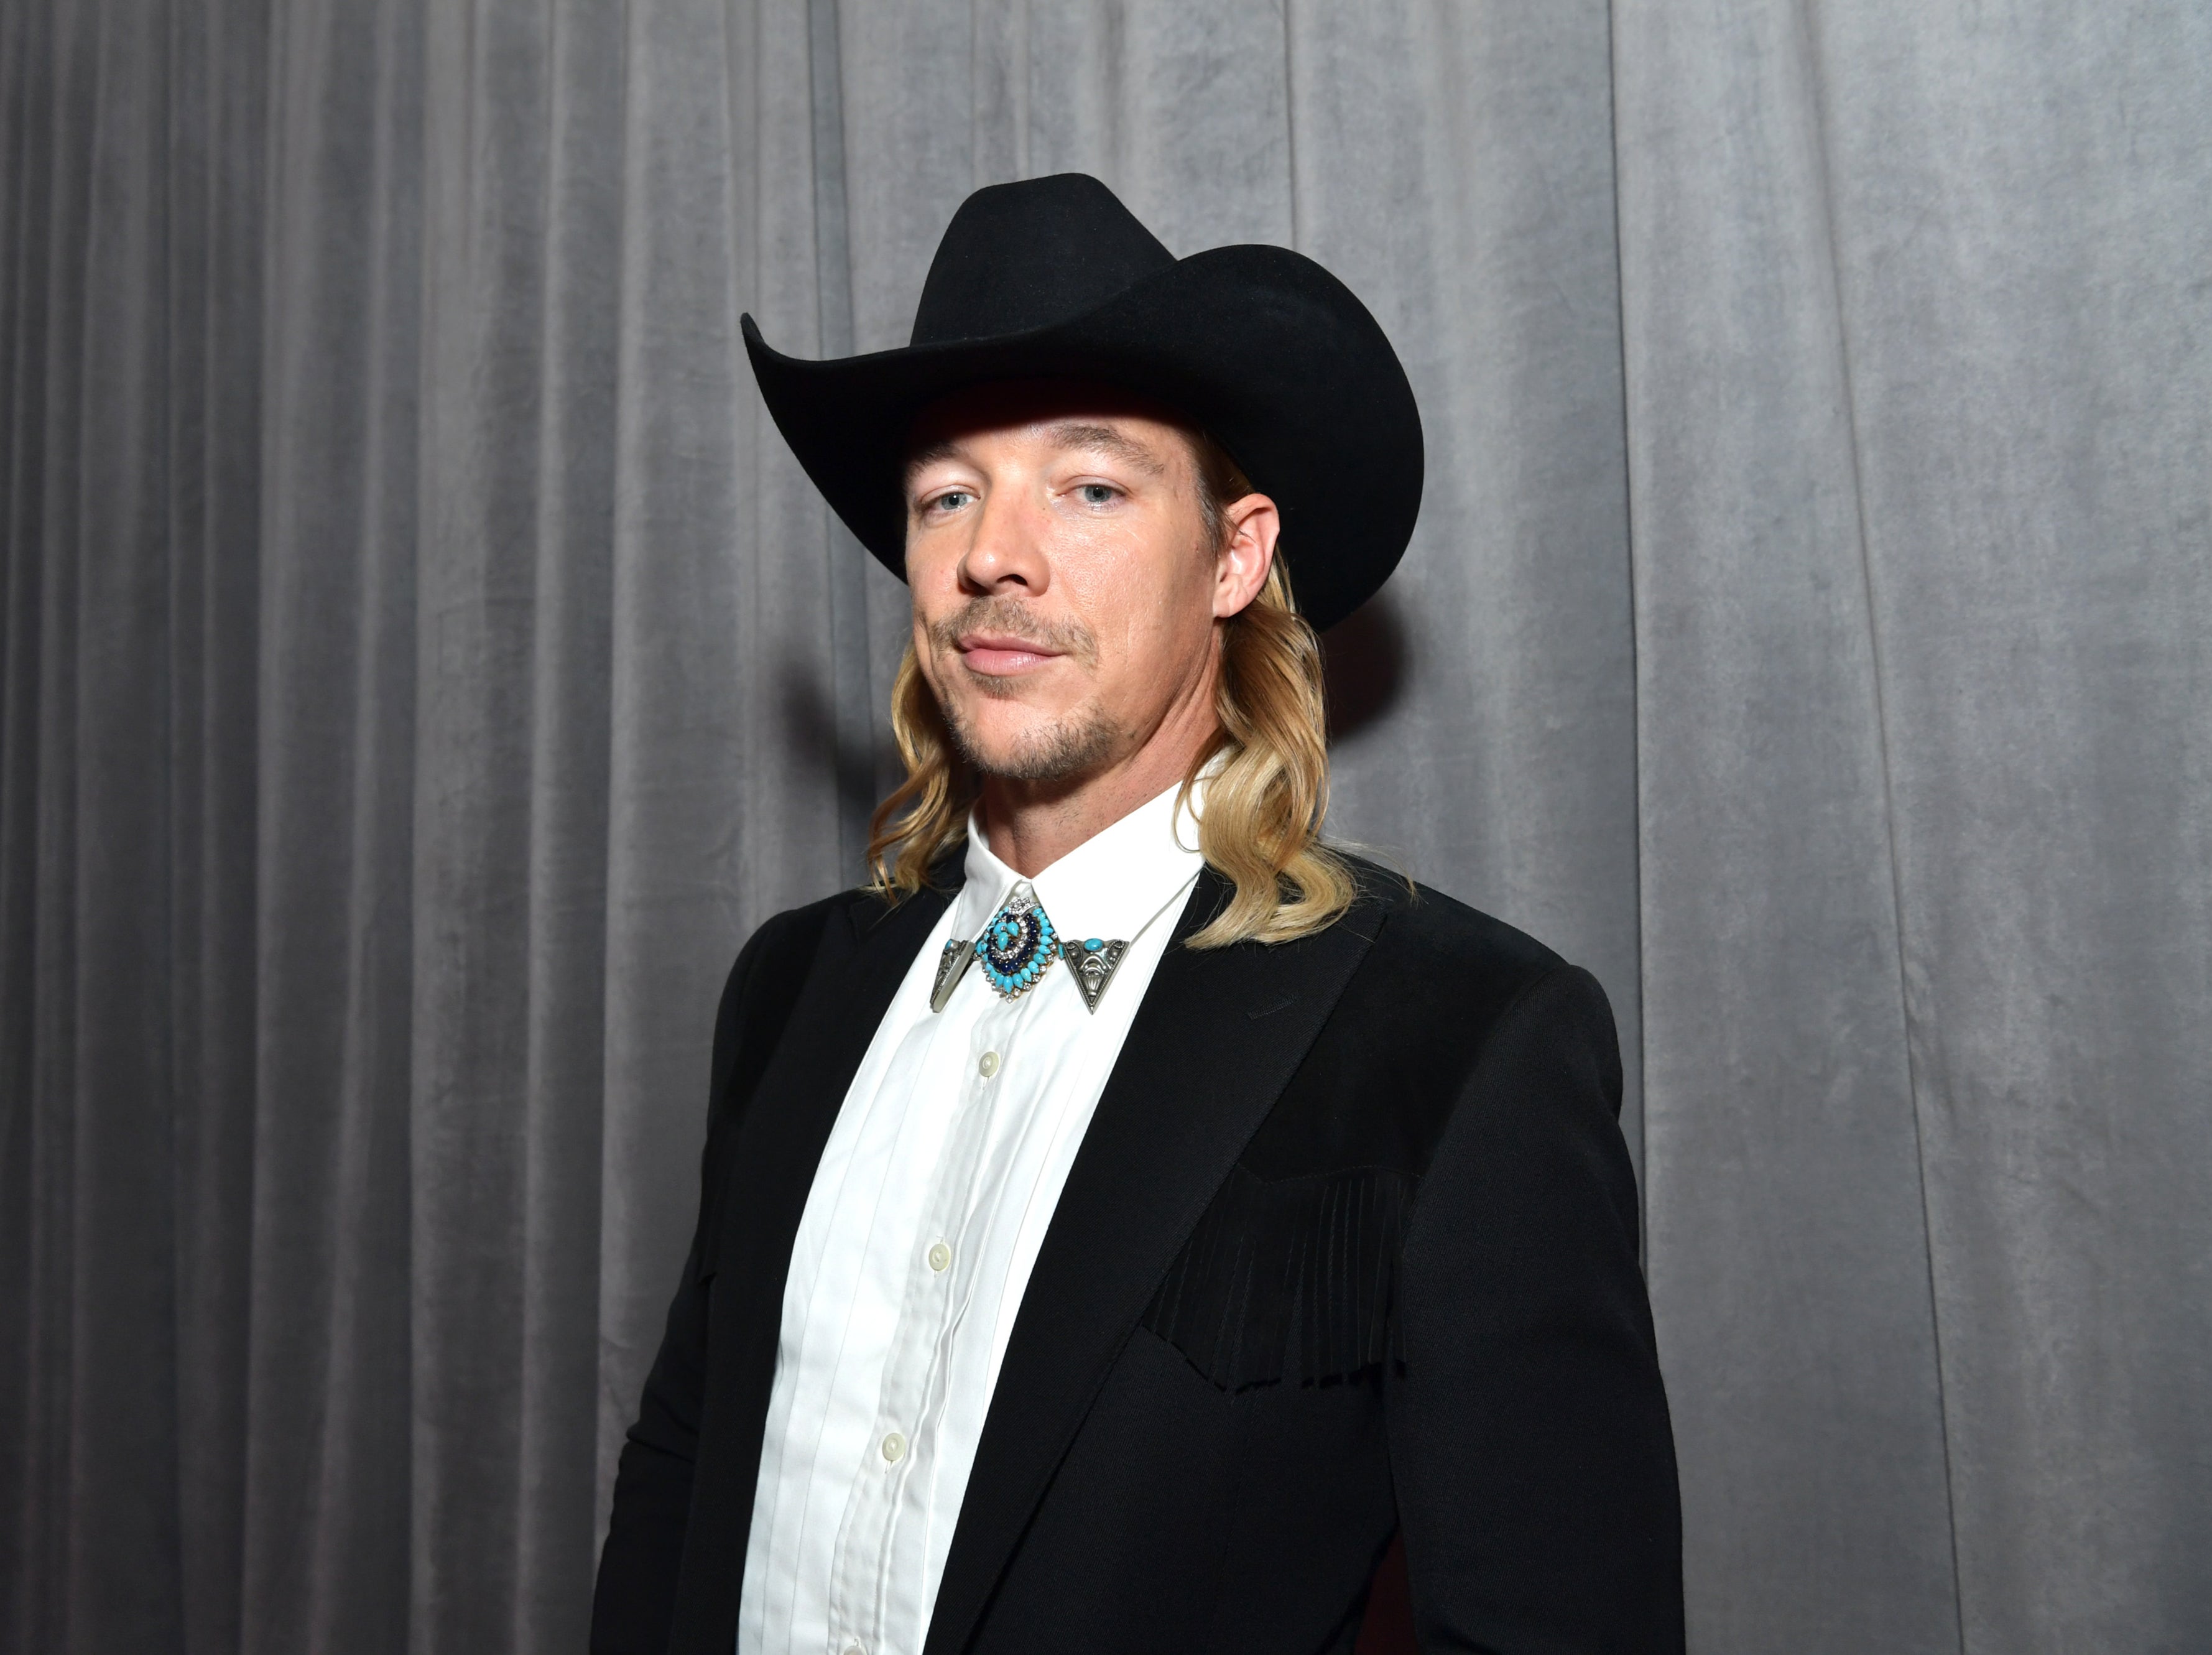 Diplo has denied allegations of sexual misconduct